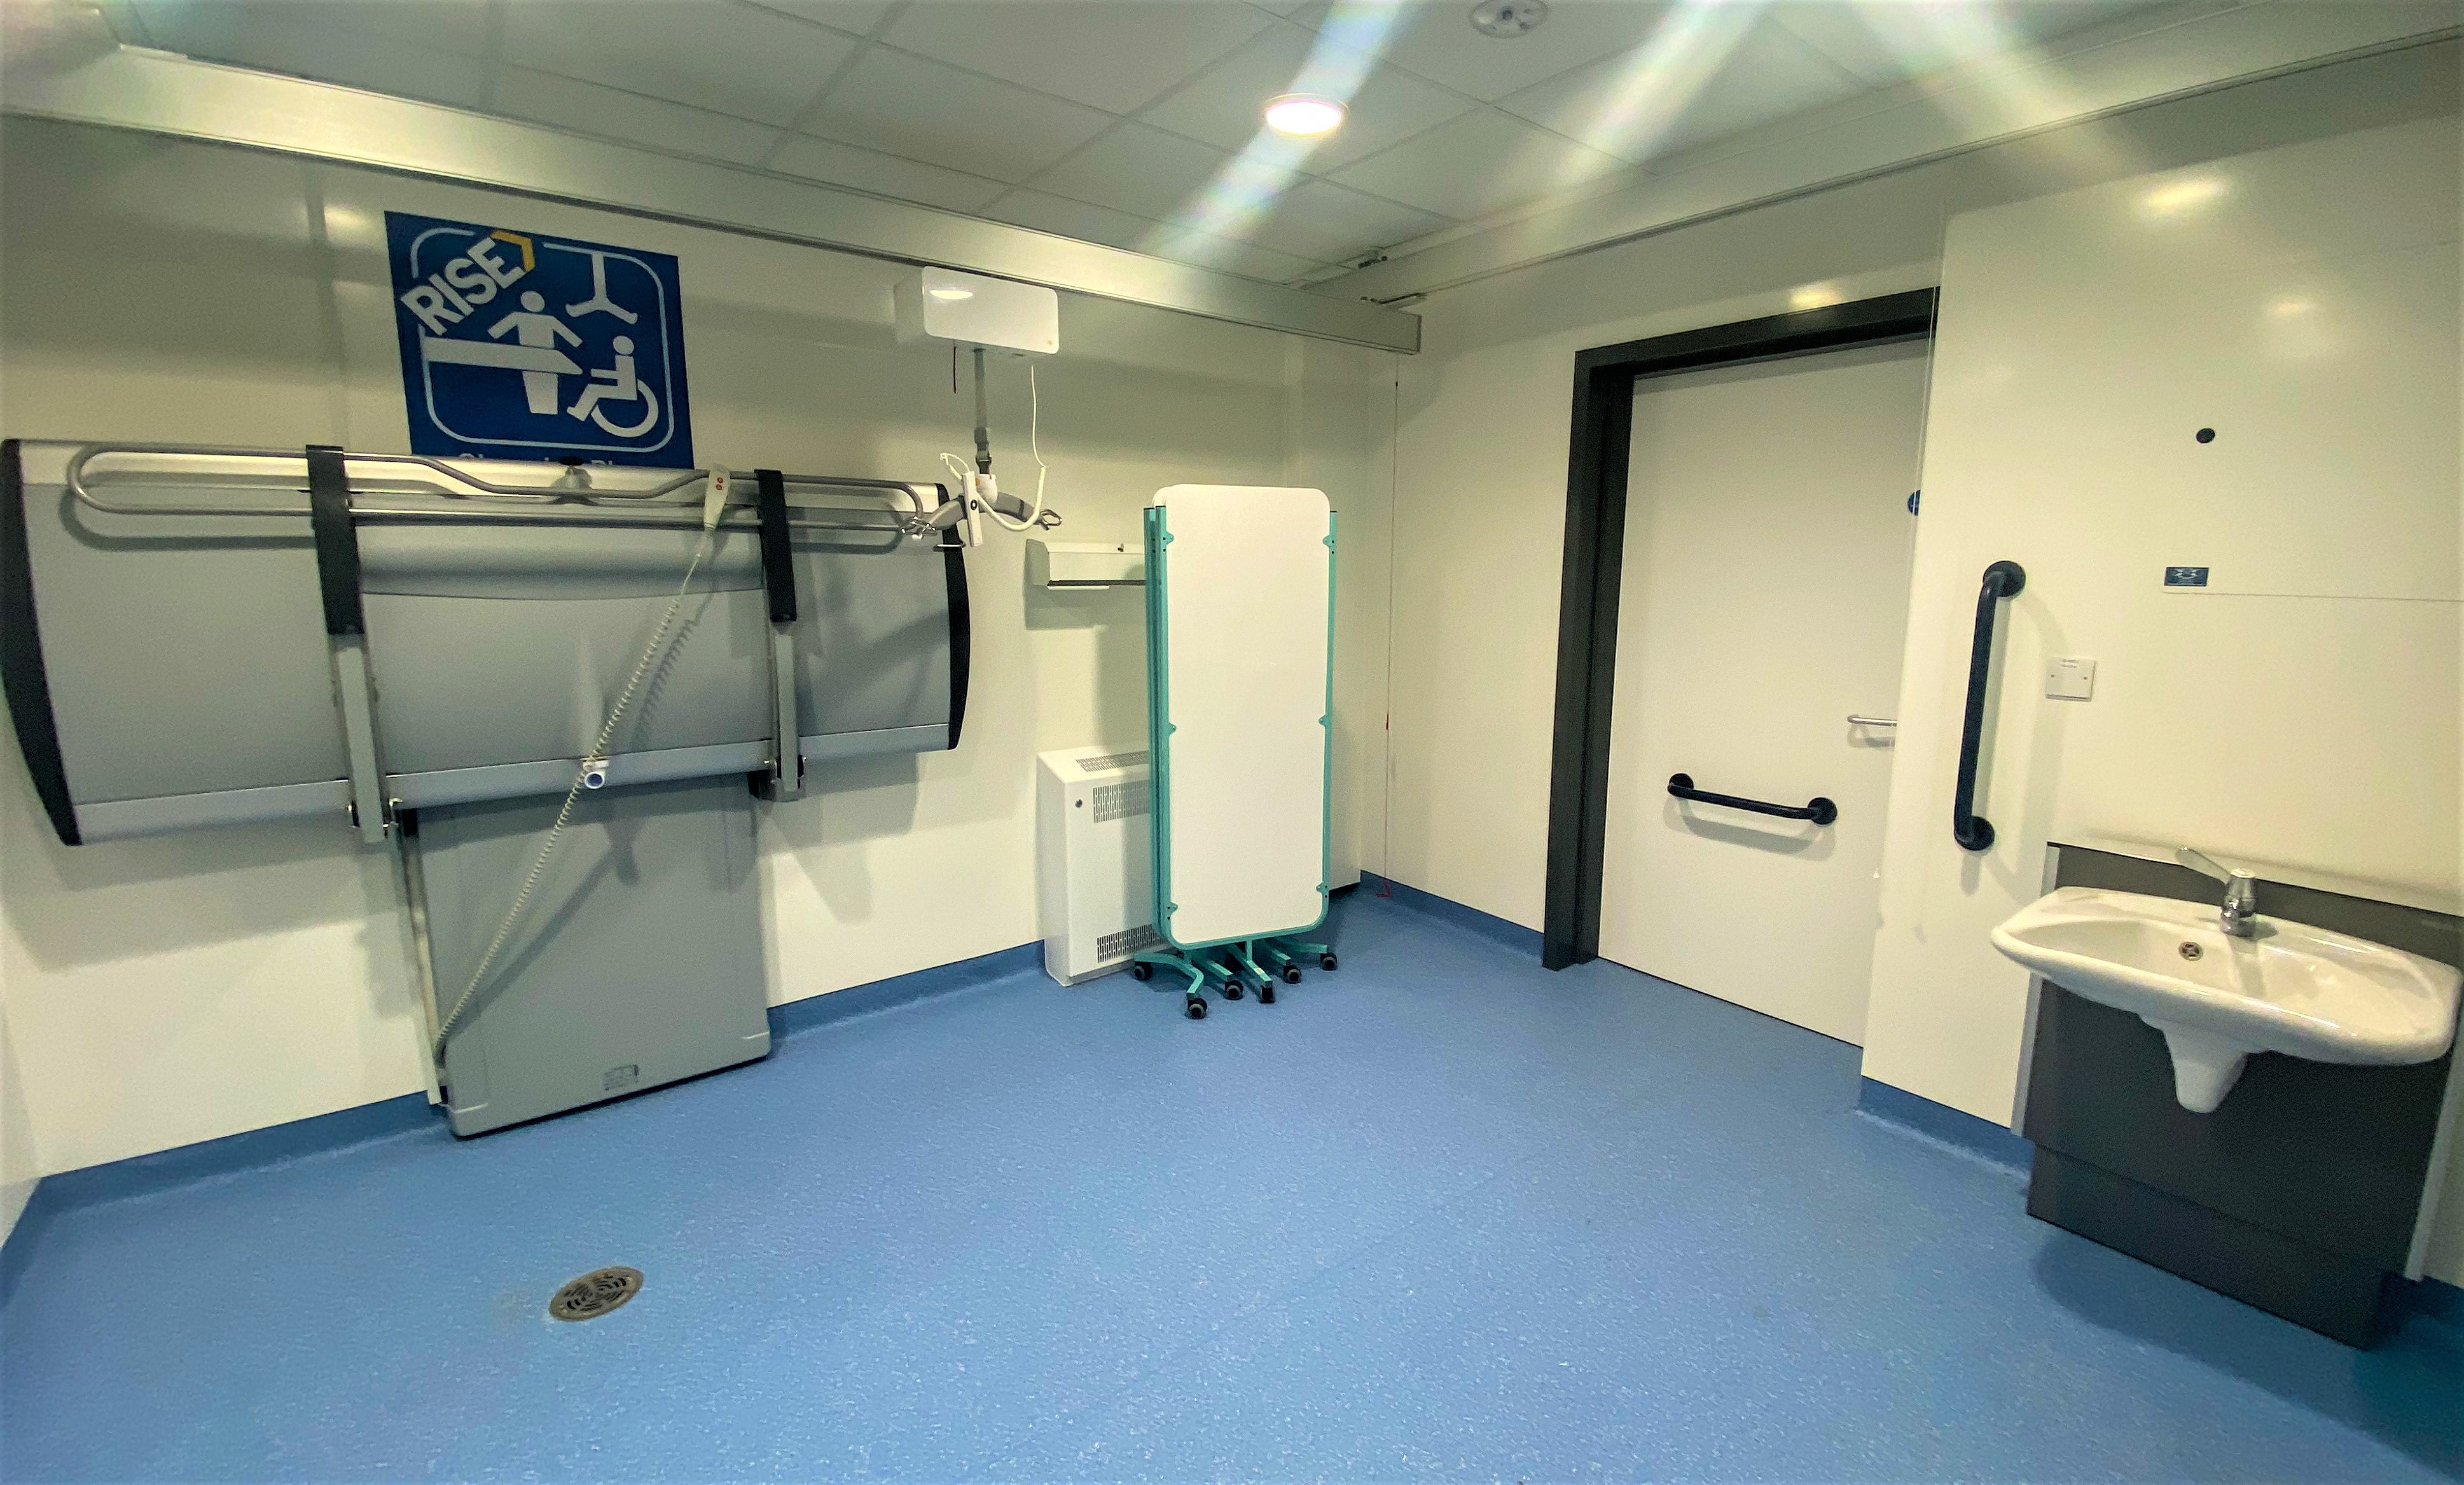 Changing Places are toilets with additional equipment for people who are not able to use the toilet independently.